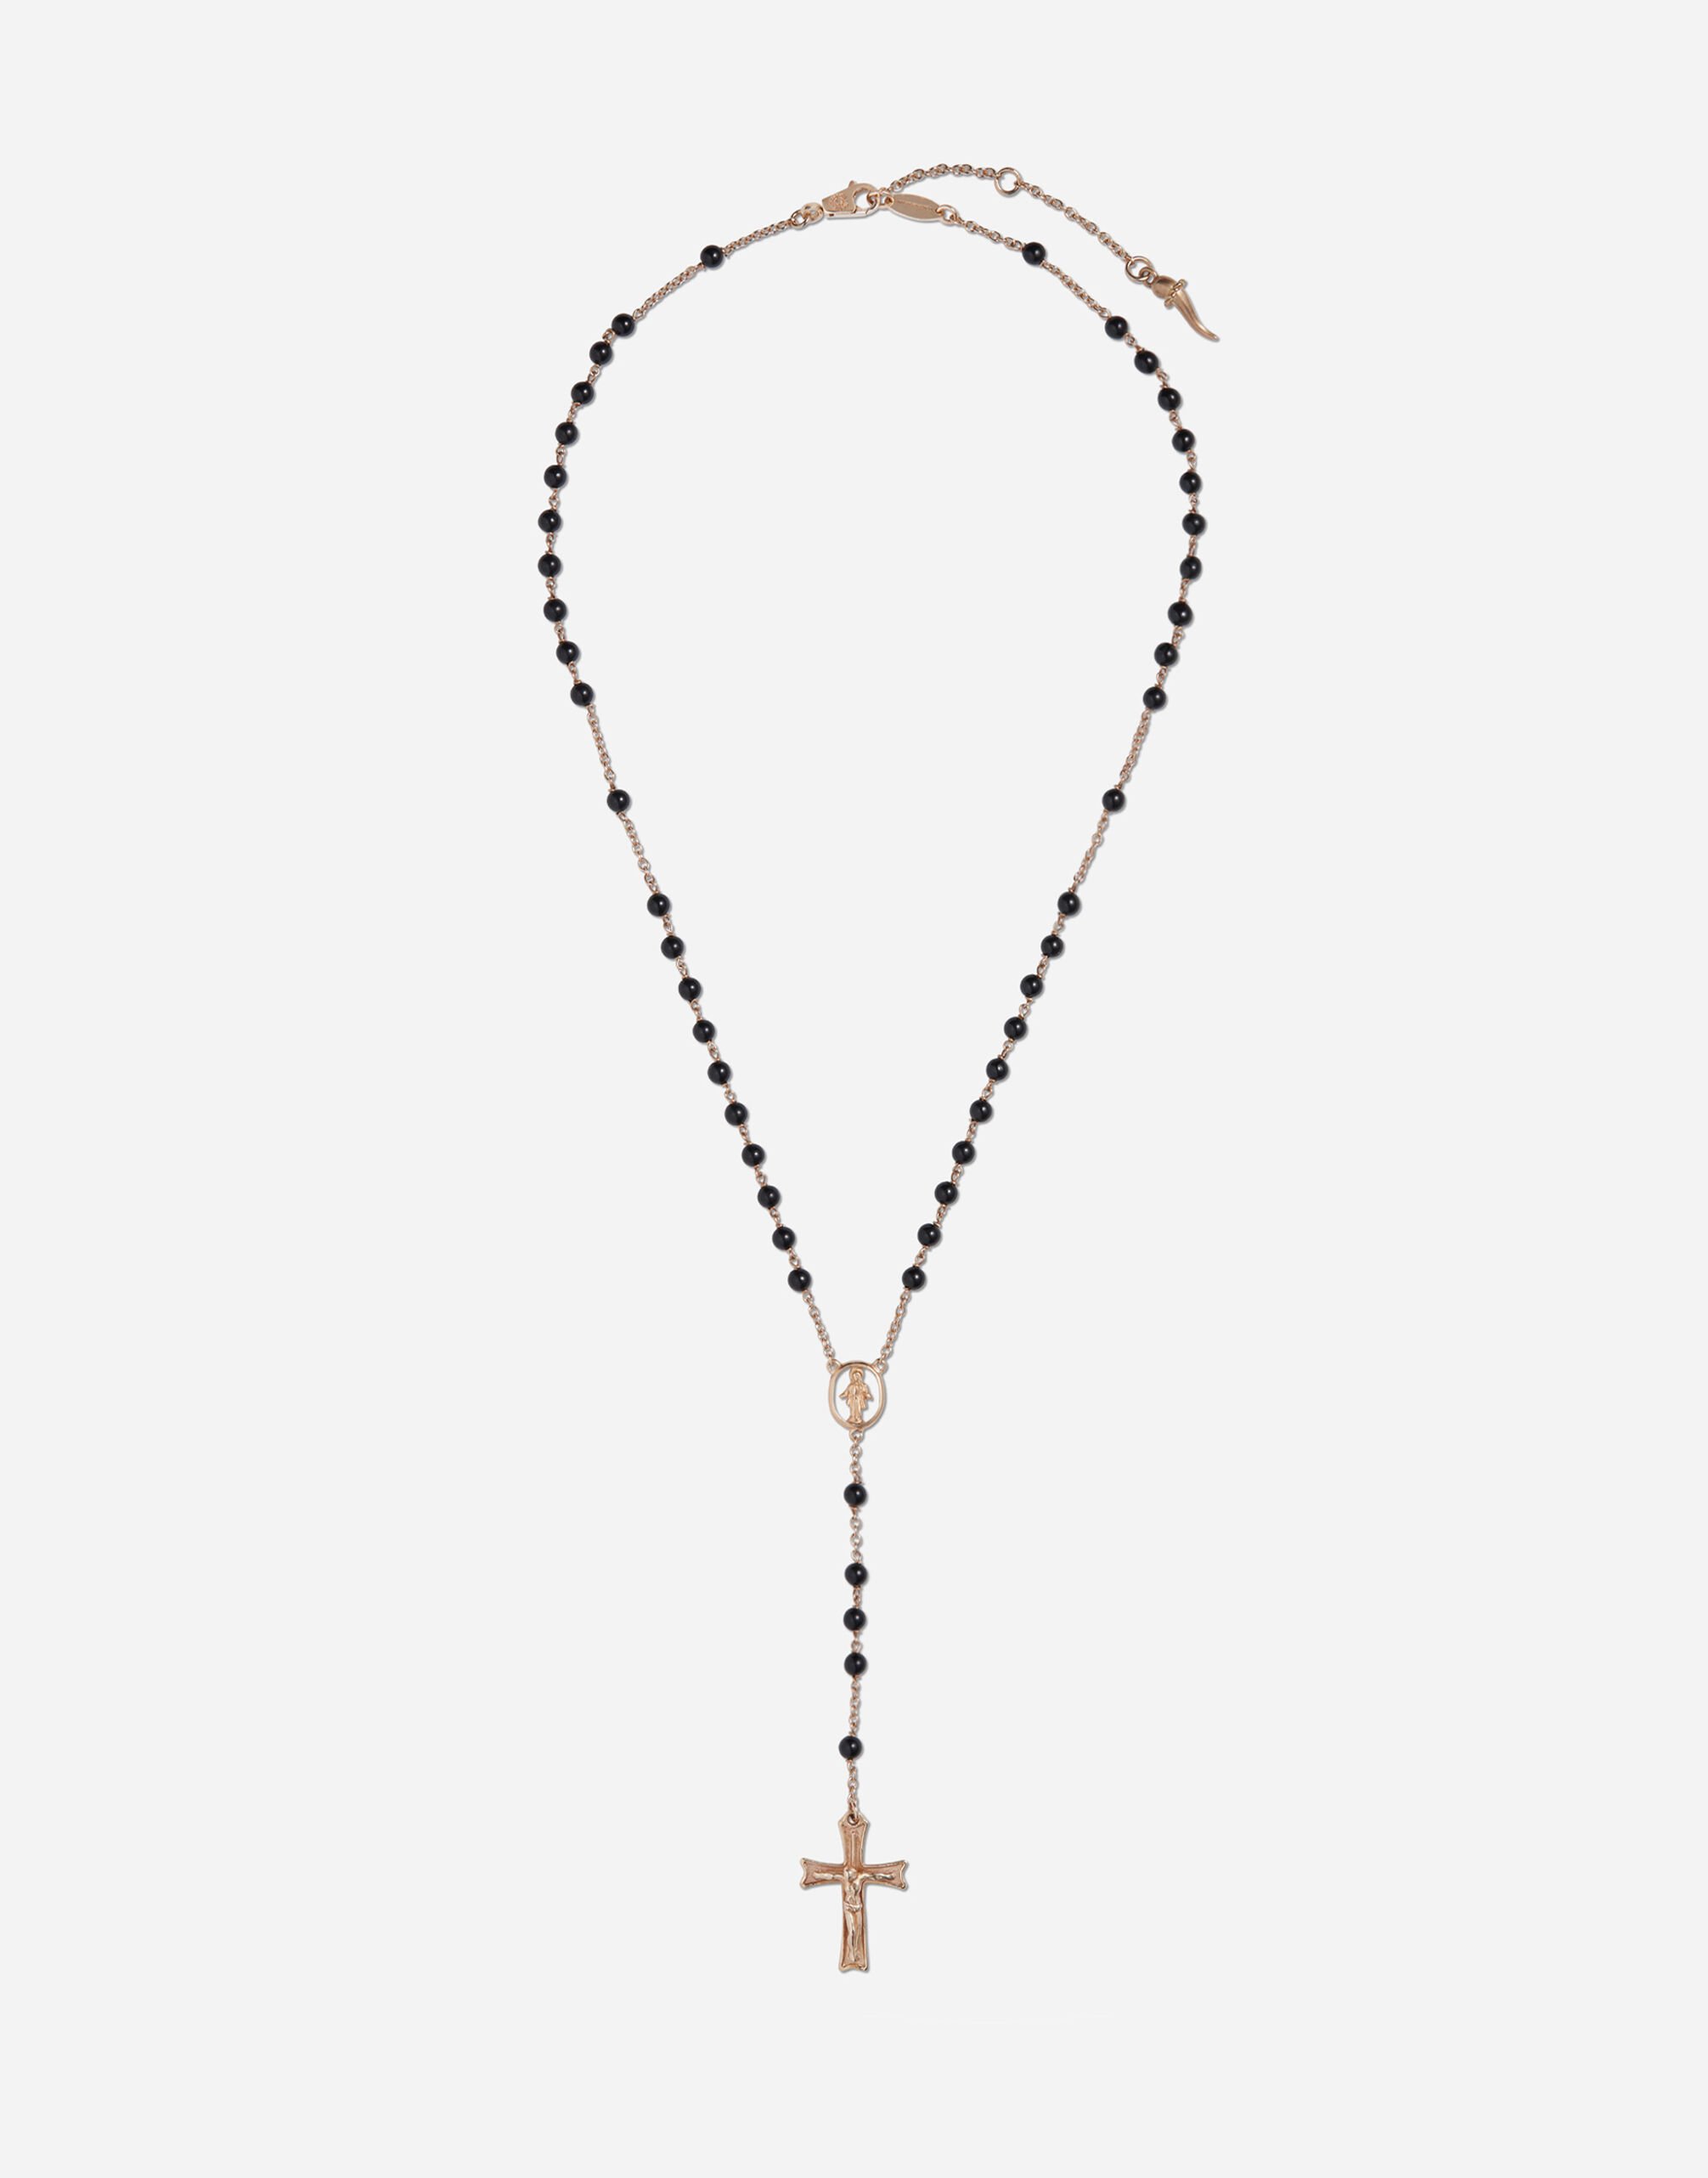 Dolce & Gabbana Yellow gold Devotion rosary necklace with black jade spheres Gold WNDS3GWY2N1